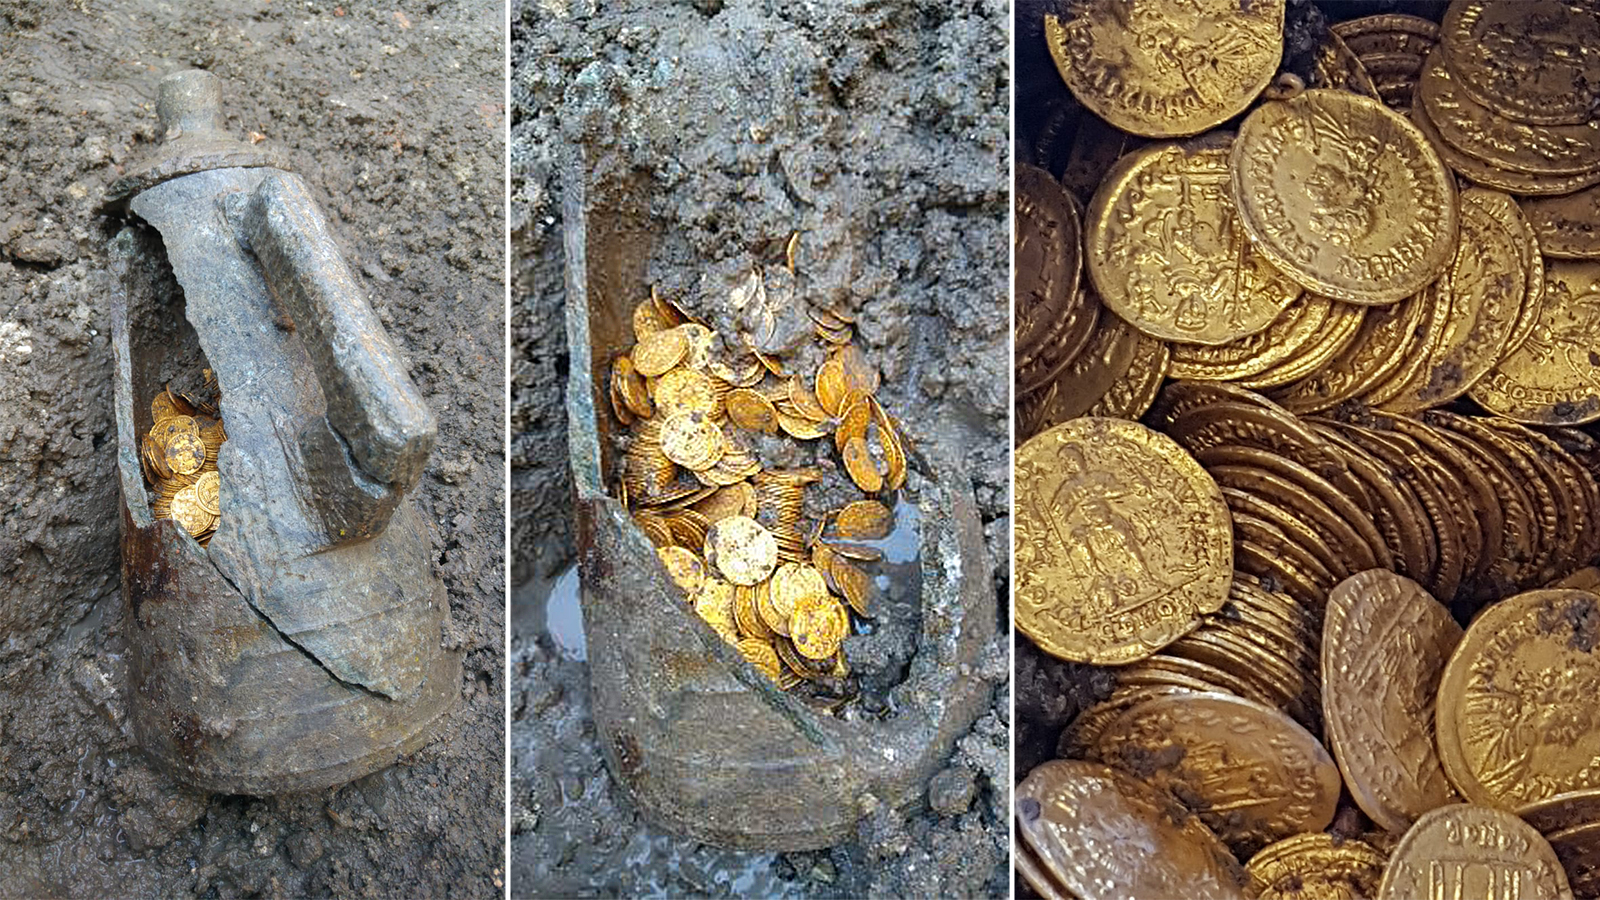 Hundreds of Roman gold coins found in basement of old theater - CNN Style